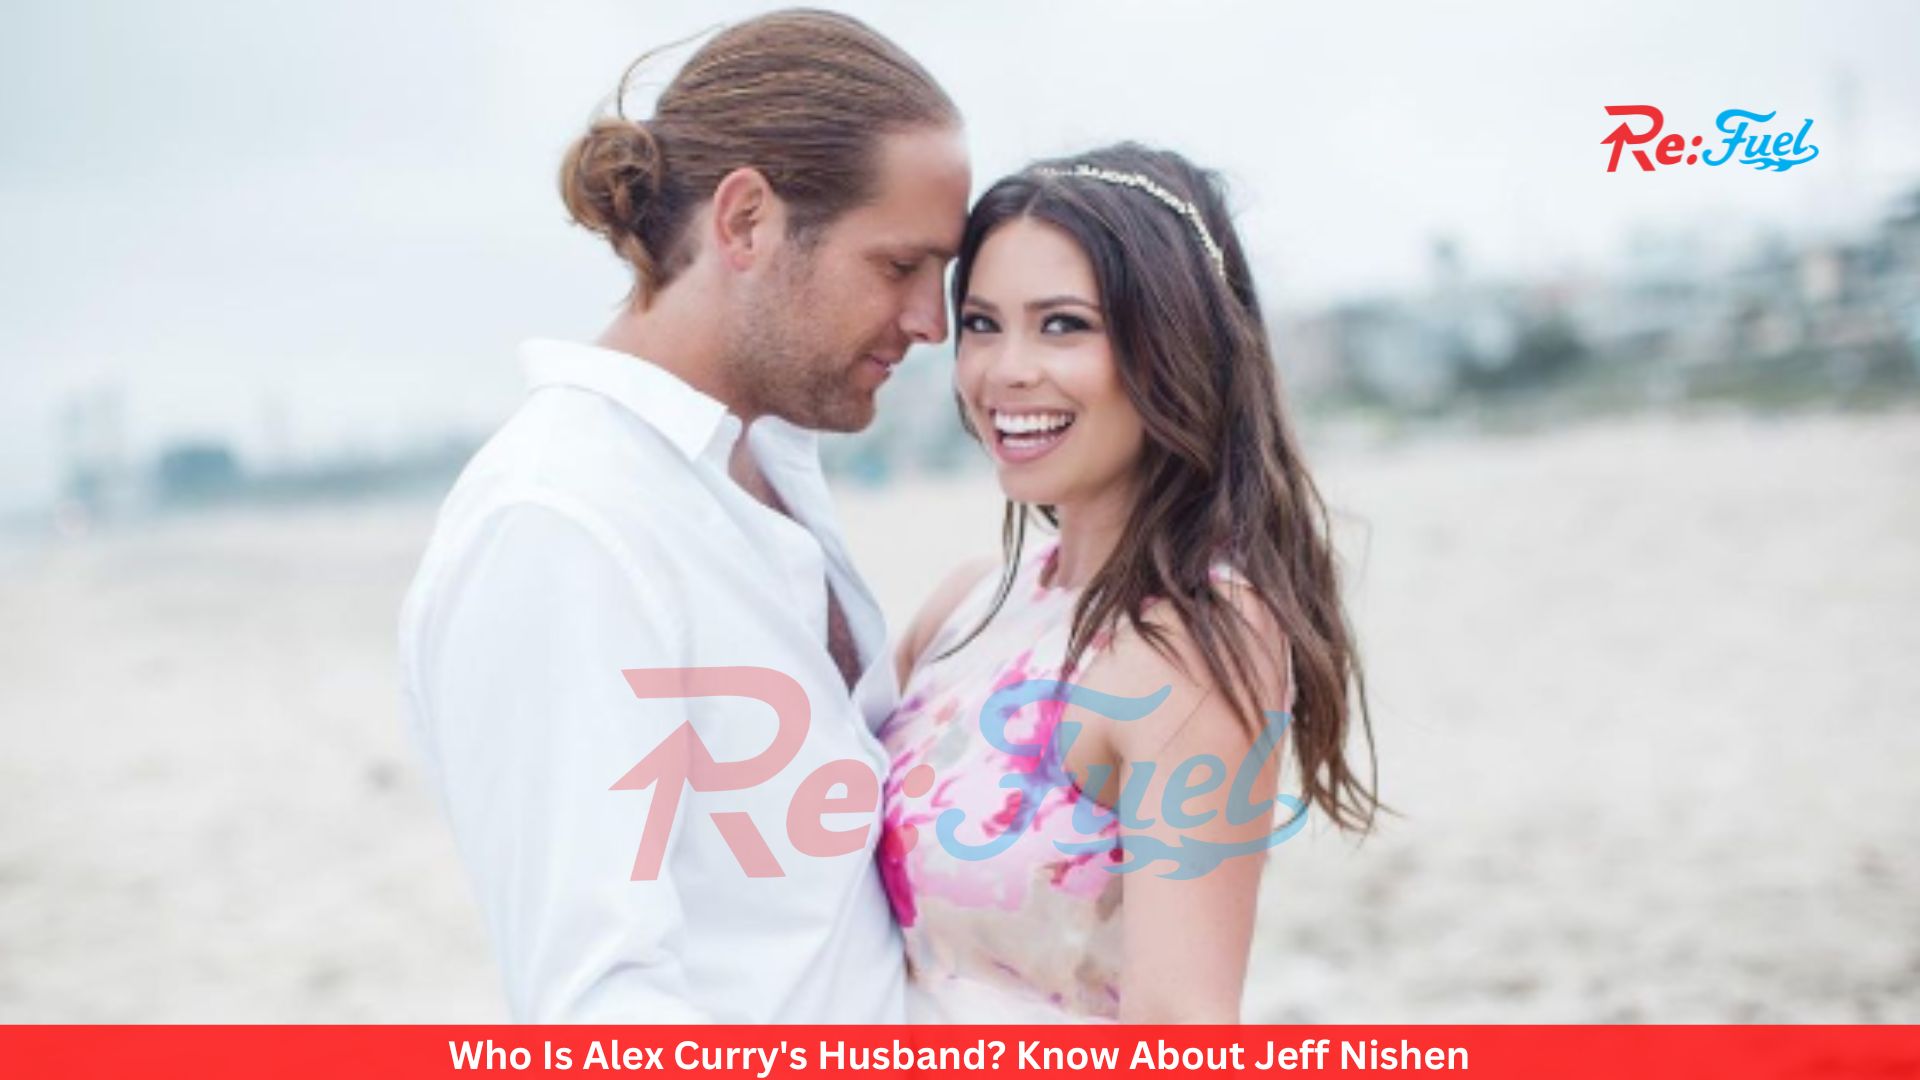 Who Is Alex Curry's Husband? Know About Jeff Nishen